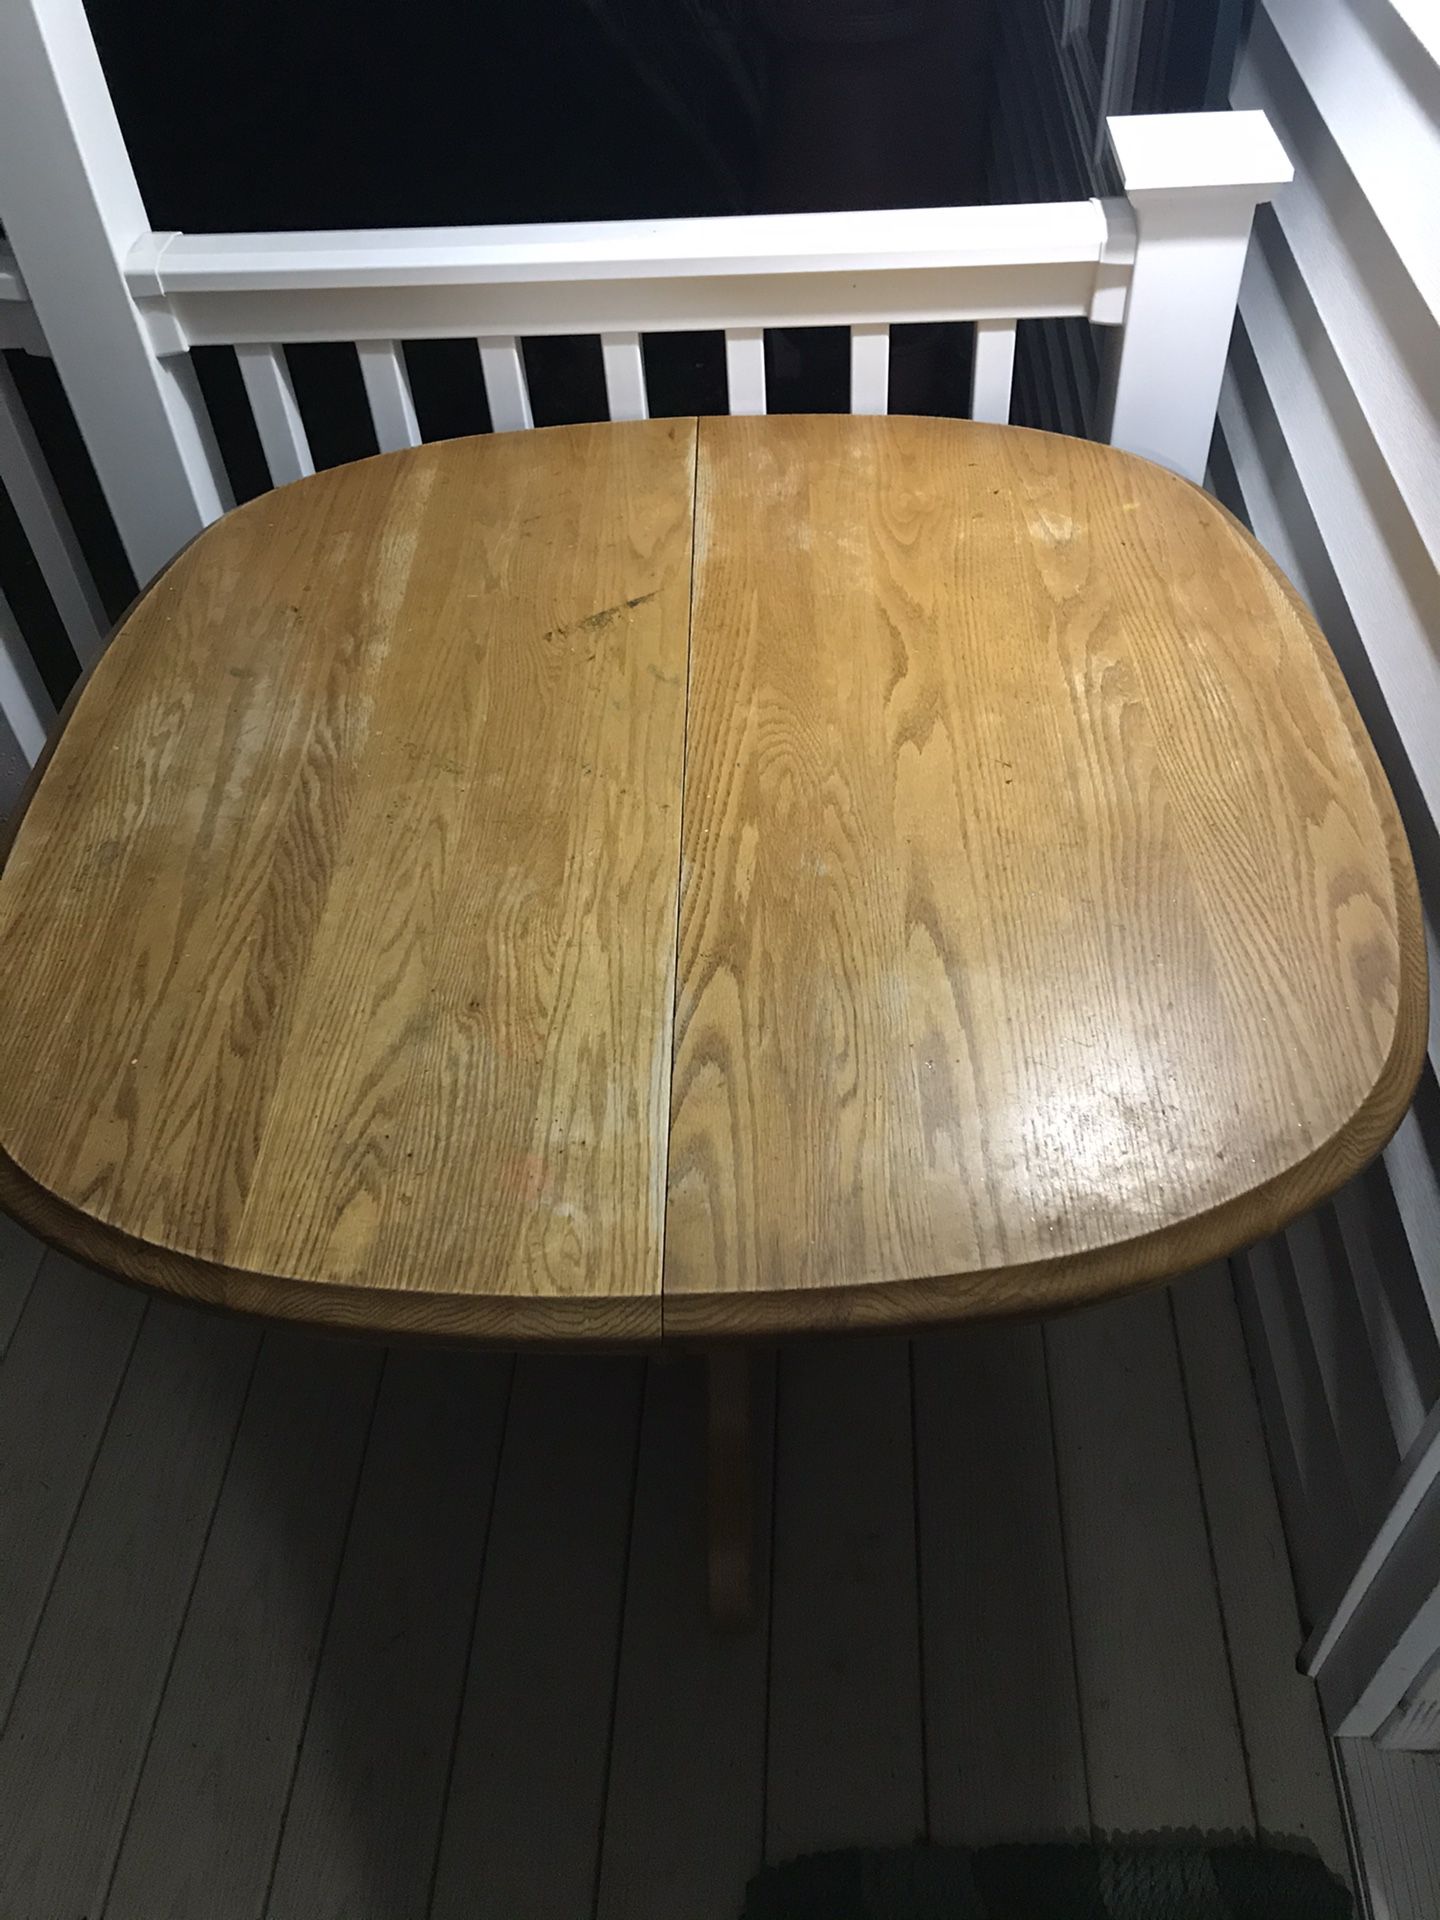 Free Kitchen Table- Wood